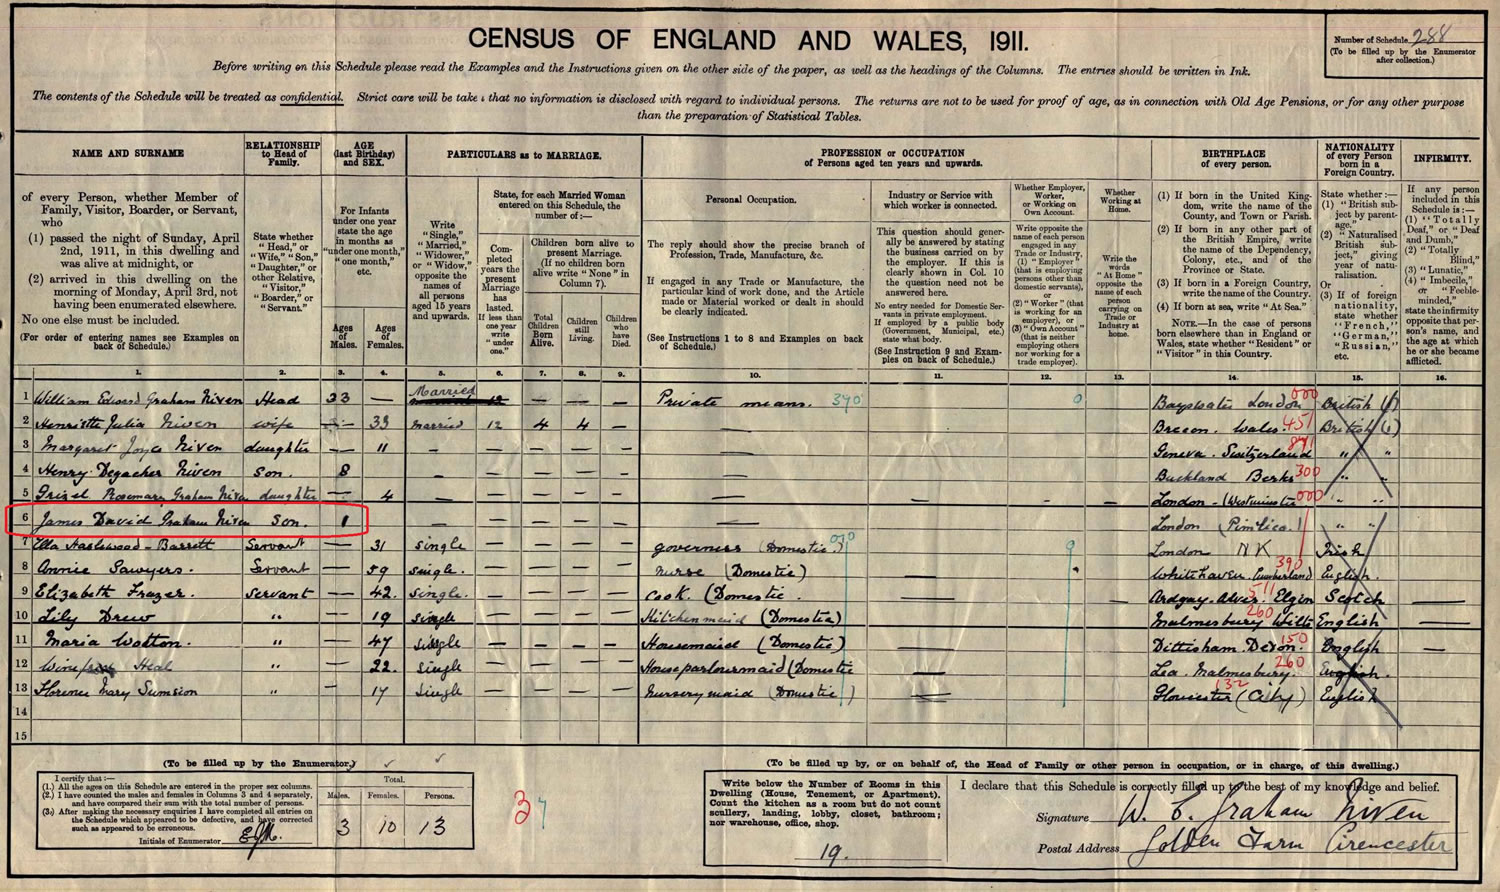 The Niven's of Golden Farm, Cirencester 1911 census image